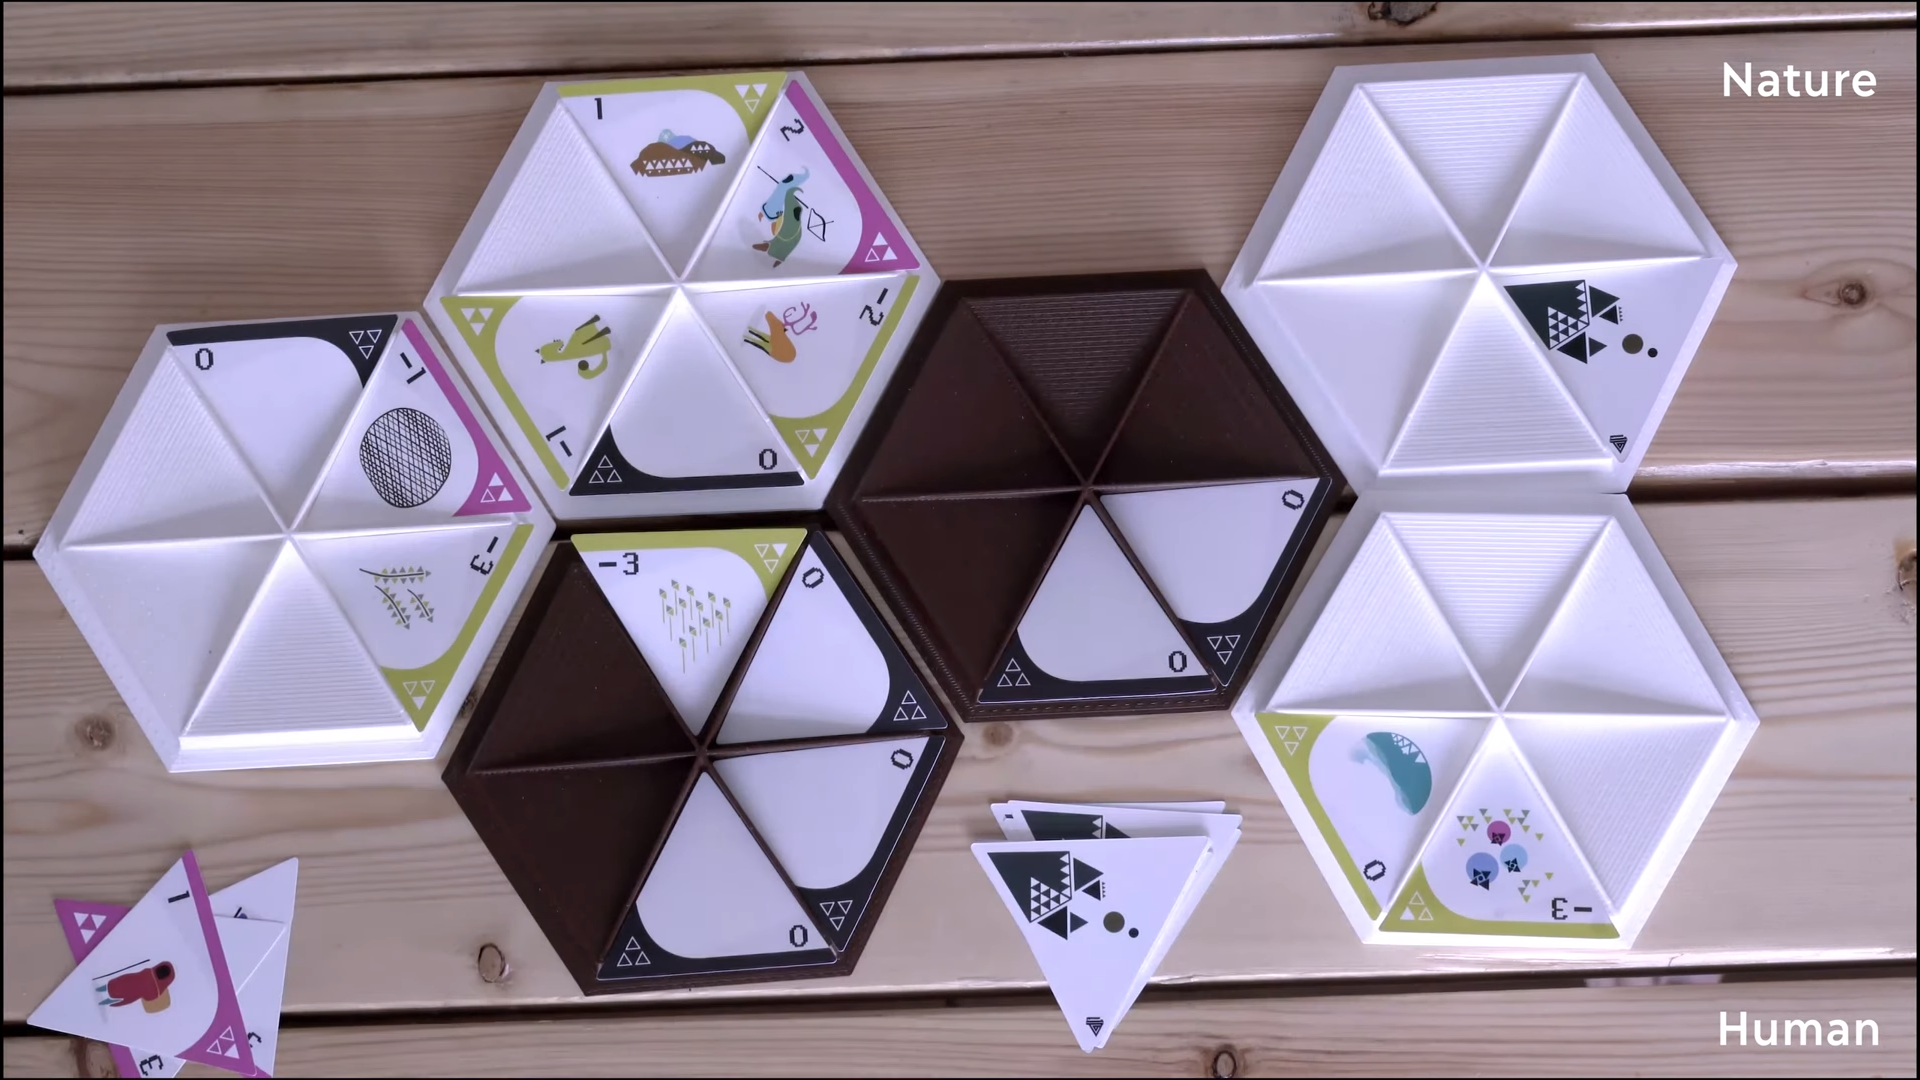 Image for ‘First Inuit-designed board game’ Nunami strives for a natural balance